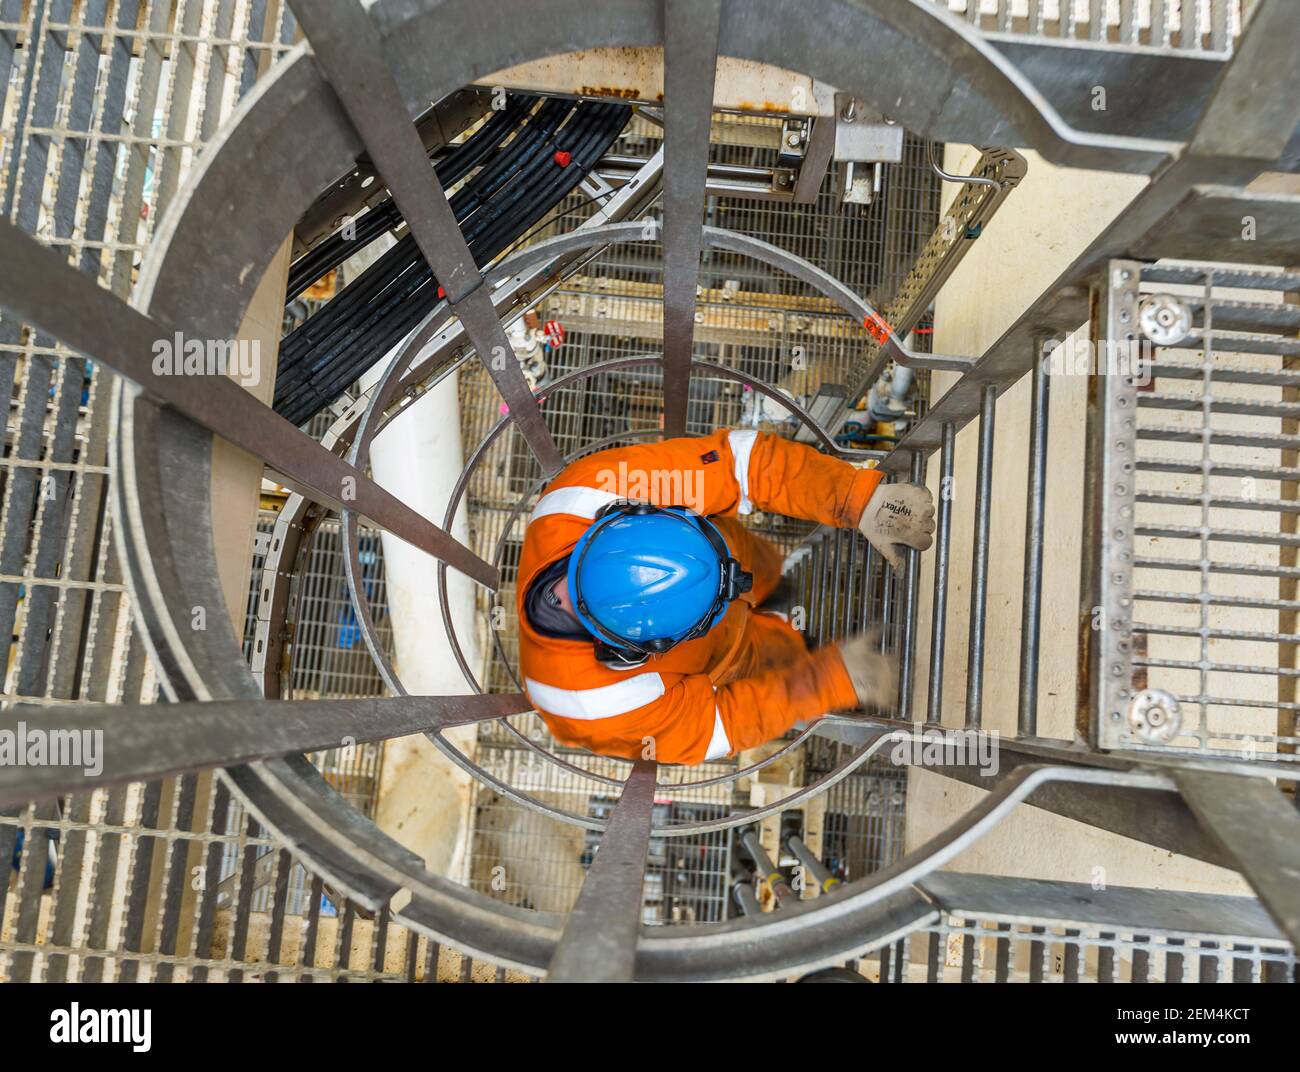 A worker wearing a boiler suit, hard hat, and gloves descending a vertical ladder with safety cage Stock Photo